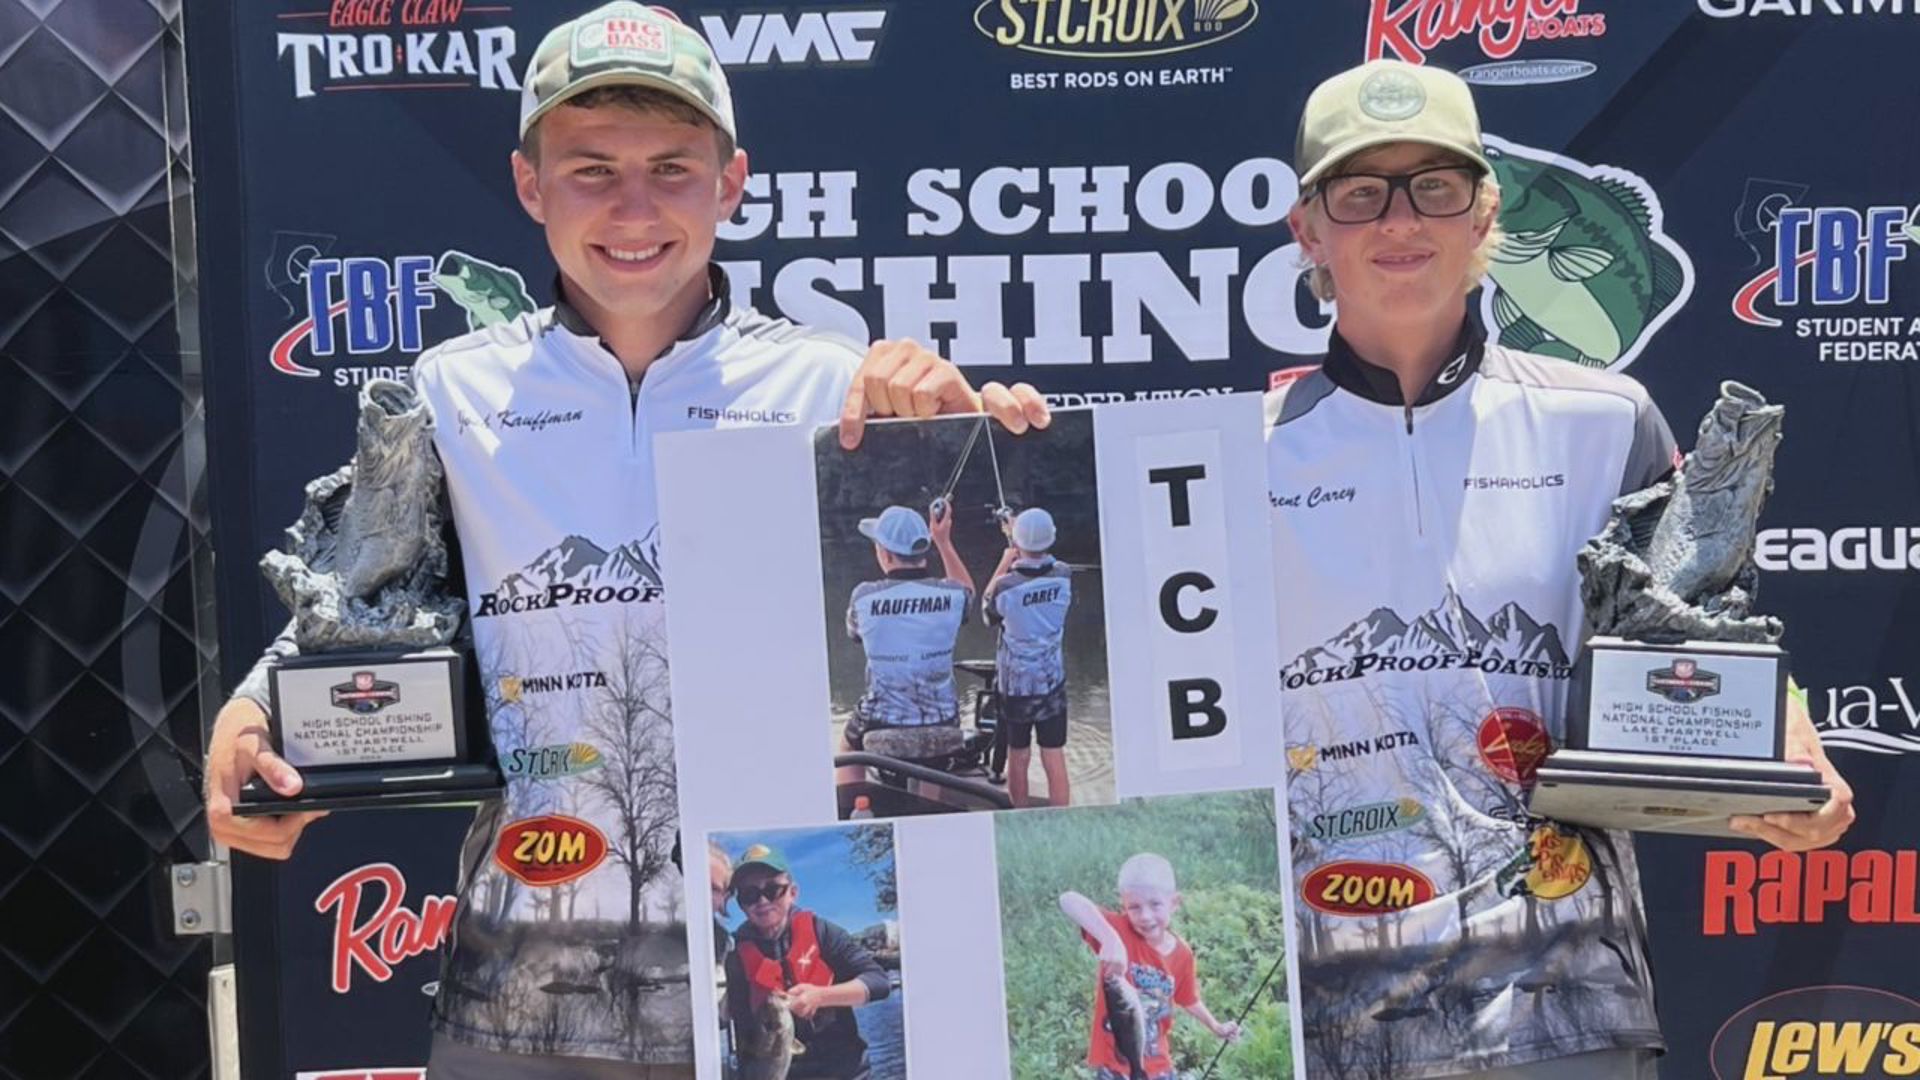 Carey and Kauffman finished first in the Abu Garcia High School Fishing National Championship, finishing their final run together on top.